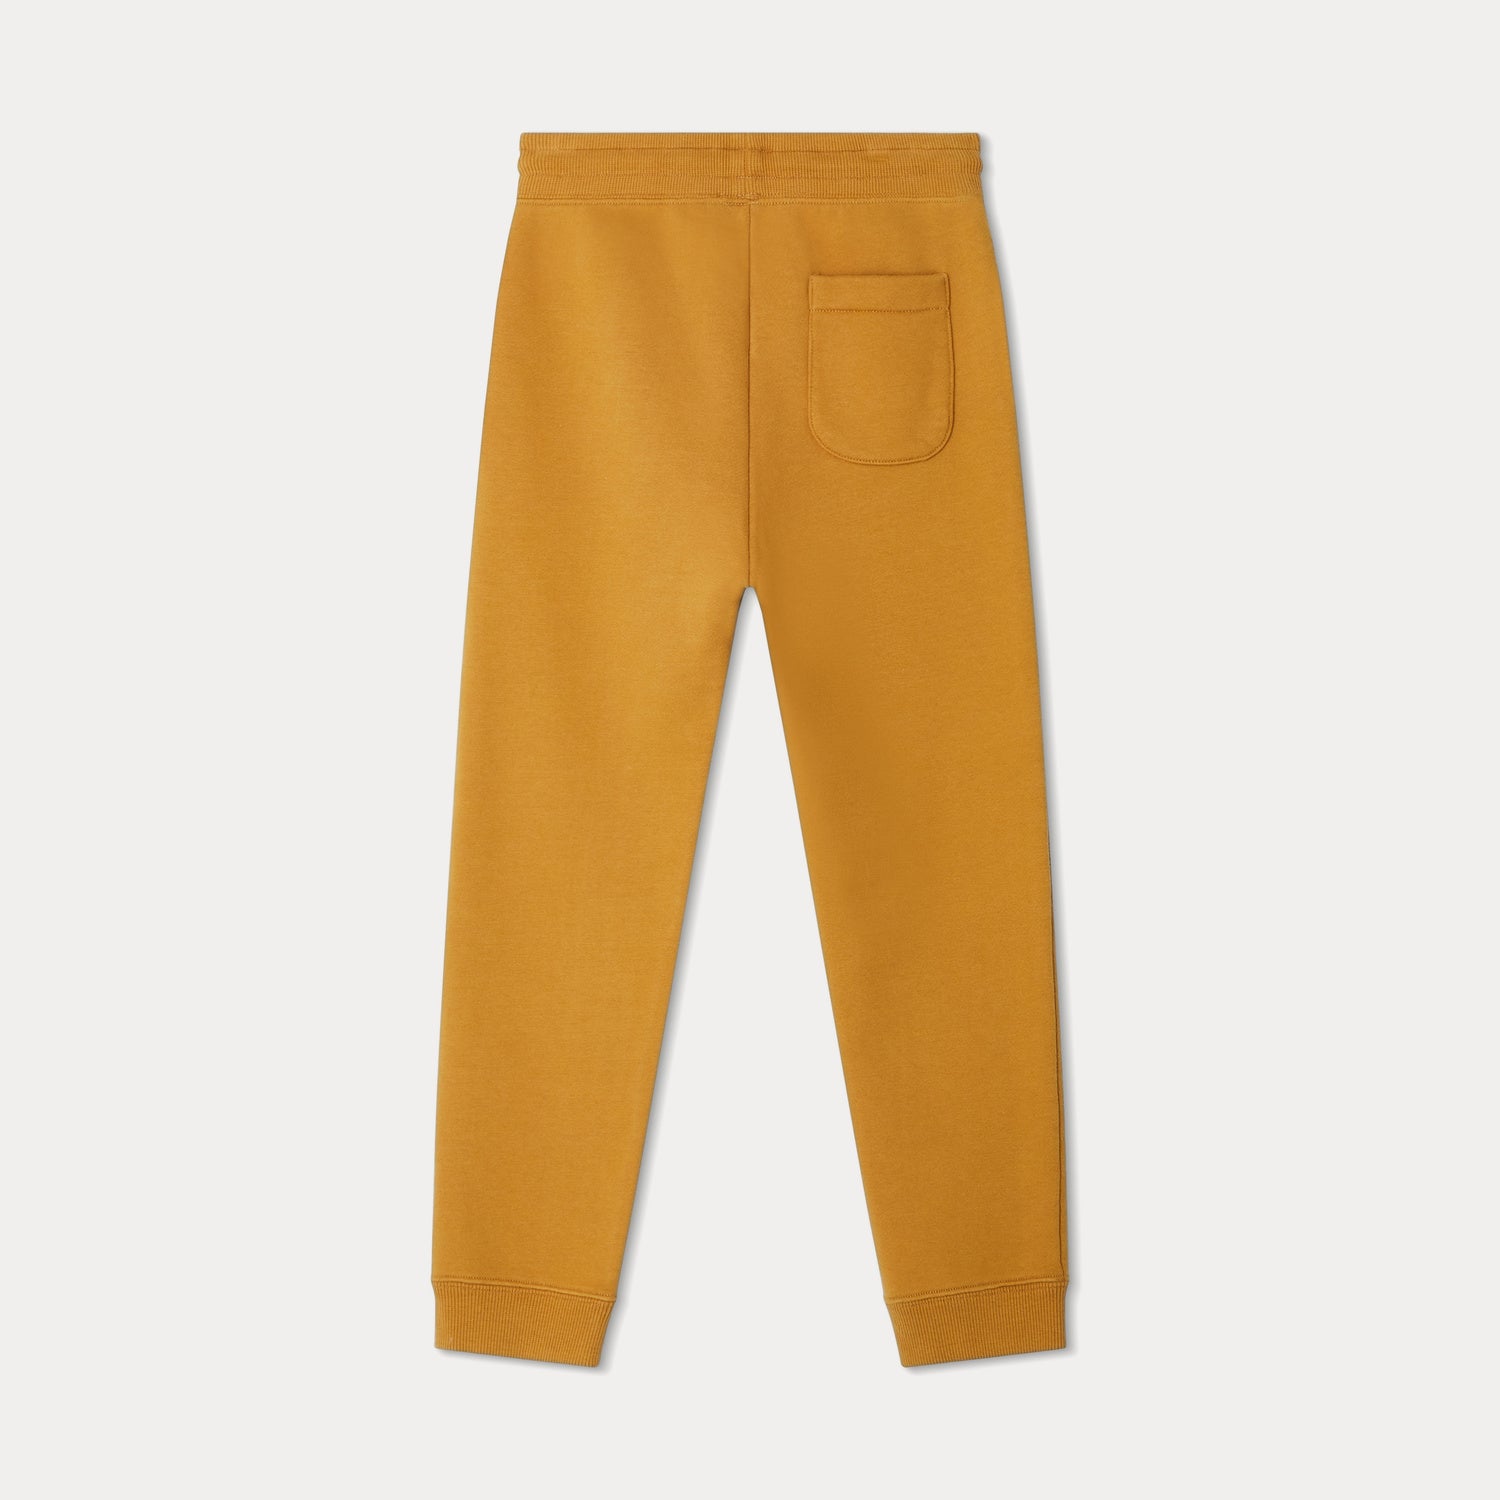 Boys Gold Cotton Trousers